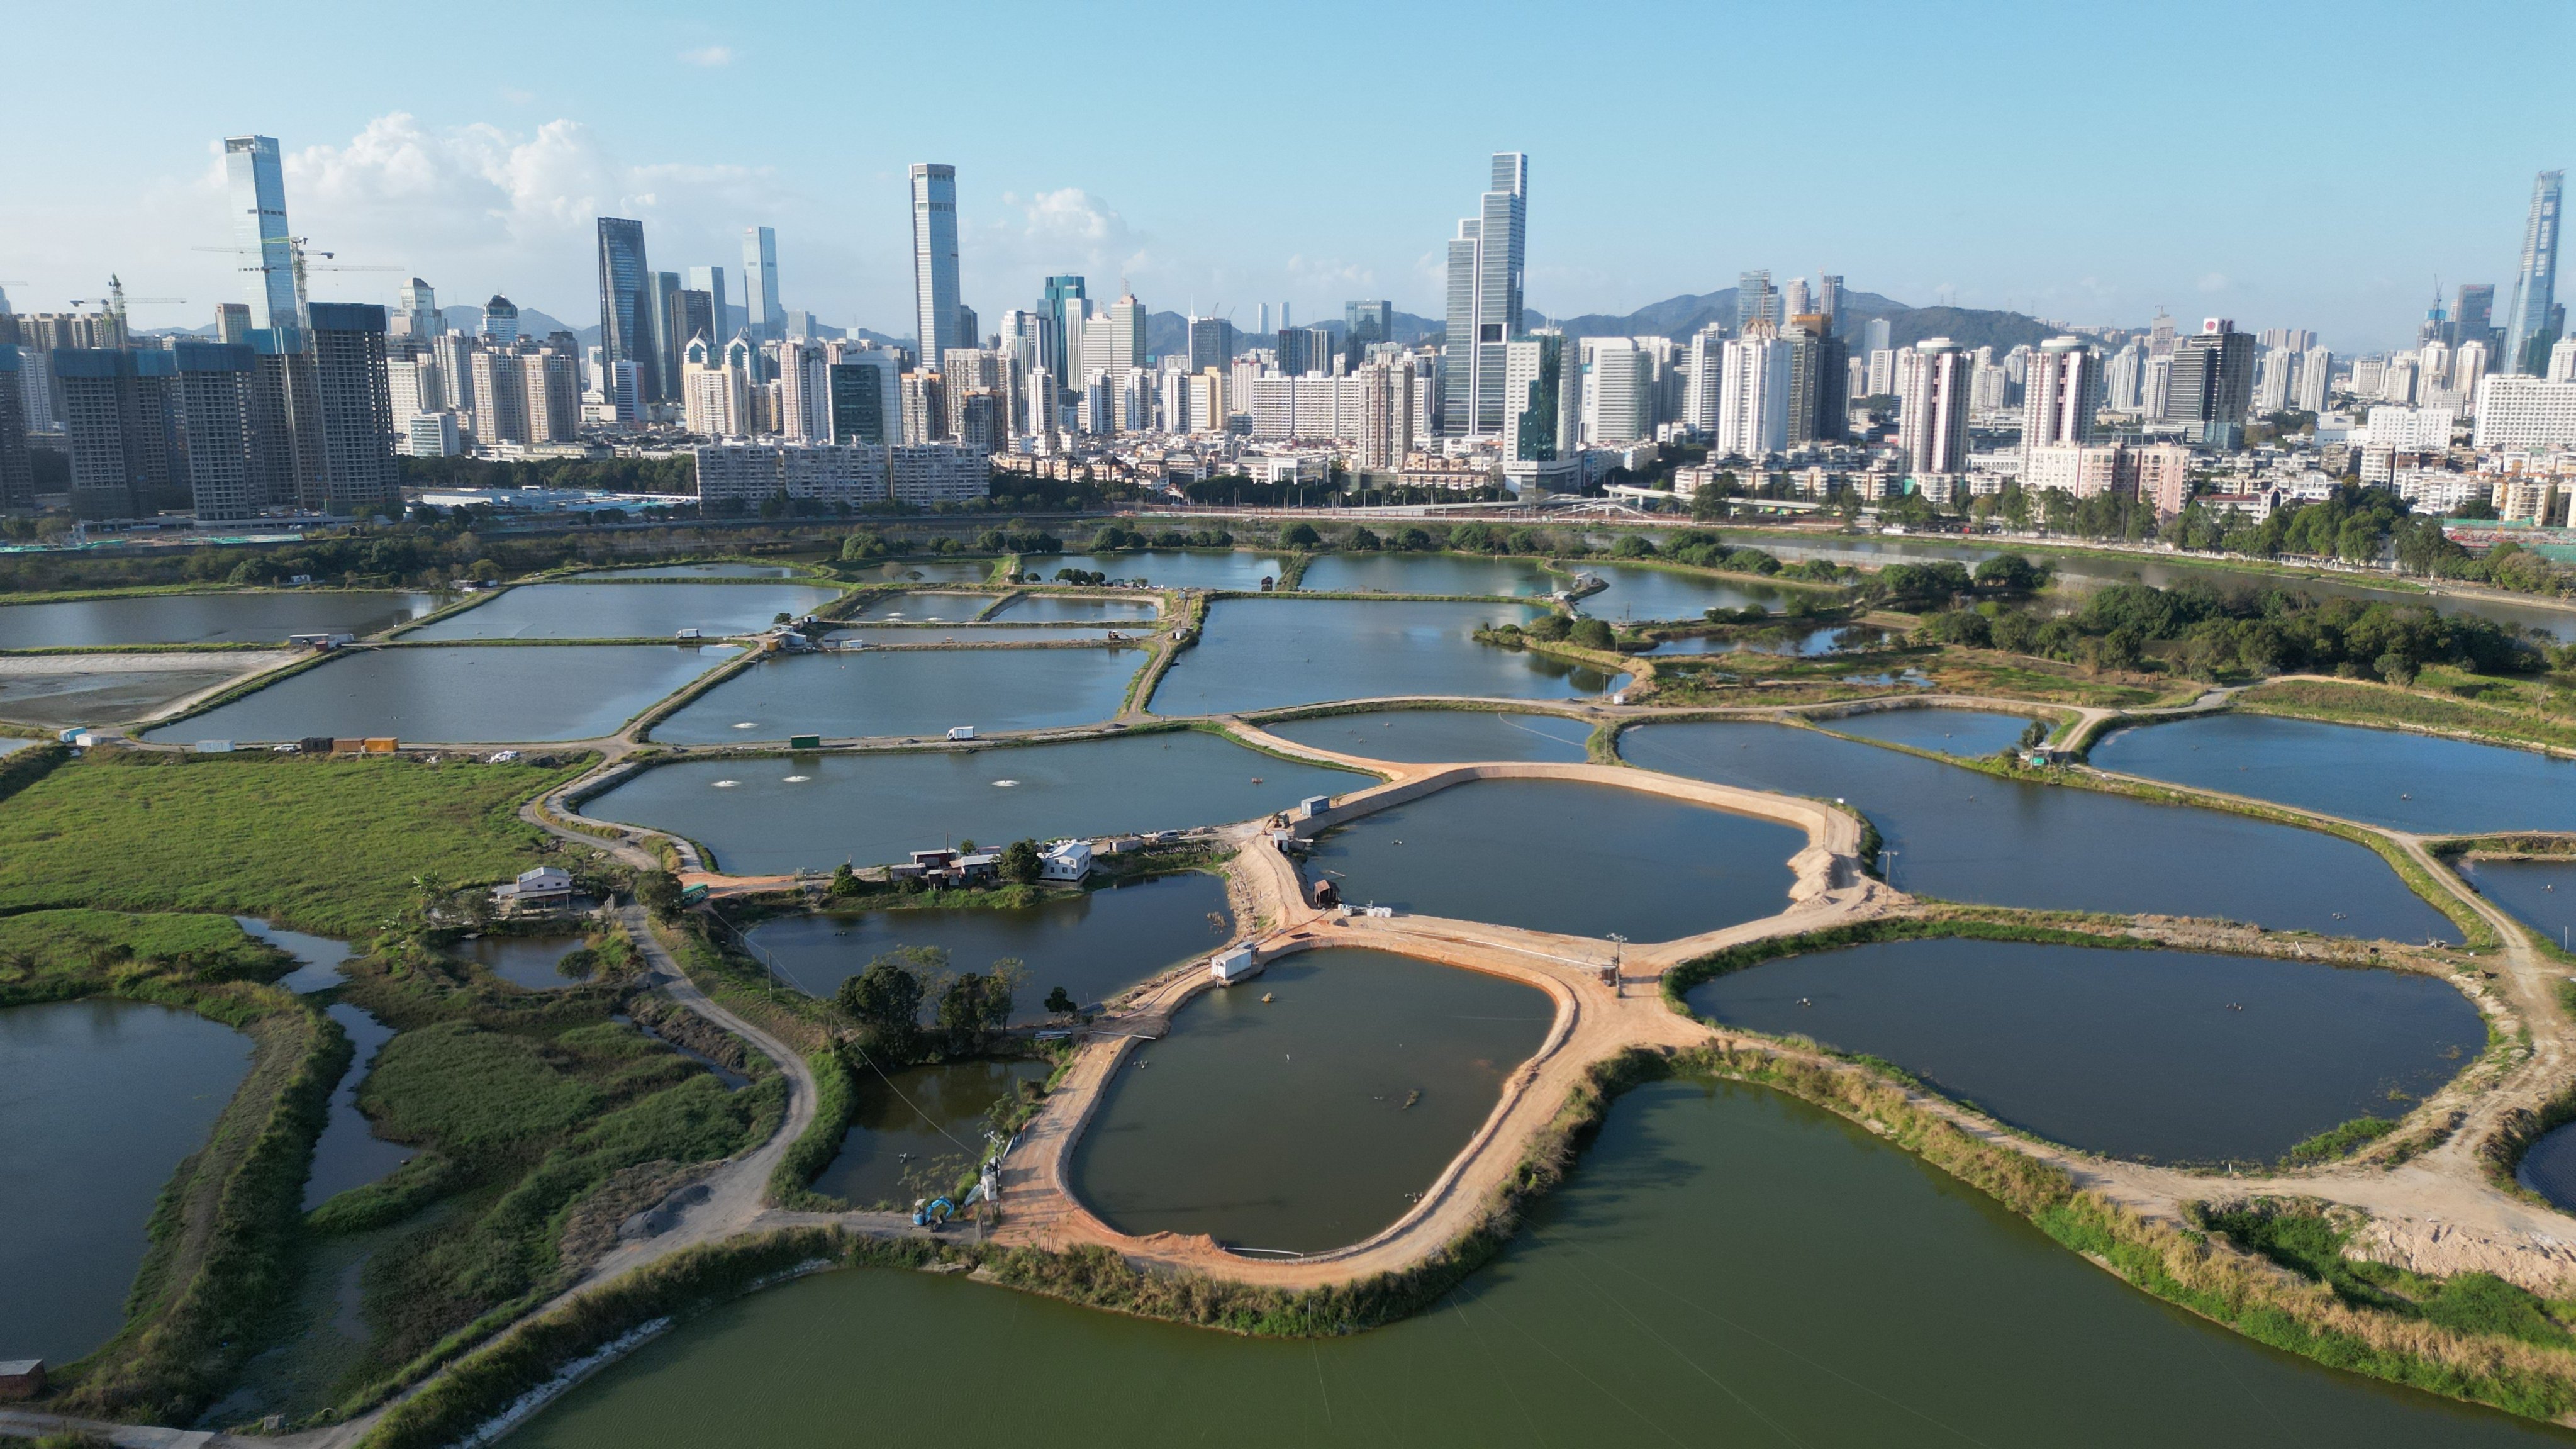 Fish ponds in Hong Kong next to the Lok Ma Chau Loop. The State Council has proposed adopting some Hong Kong systems, including those for taxation and arbitration, on the Shenzhen side of the zone. Photo: Dickson Lee